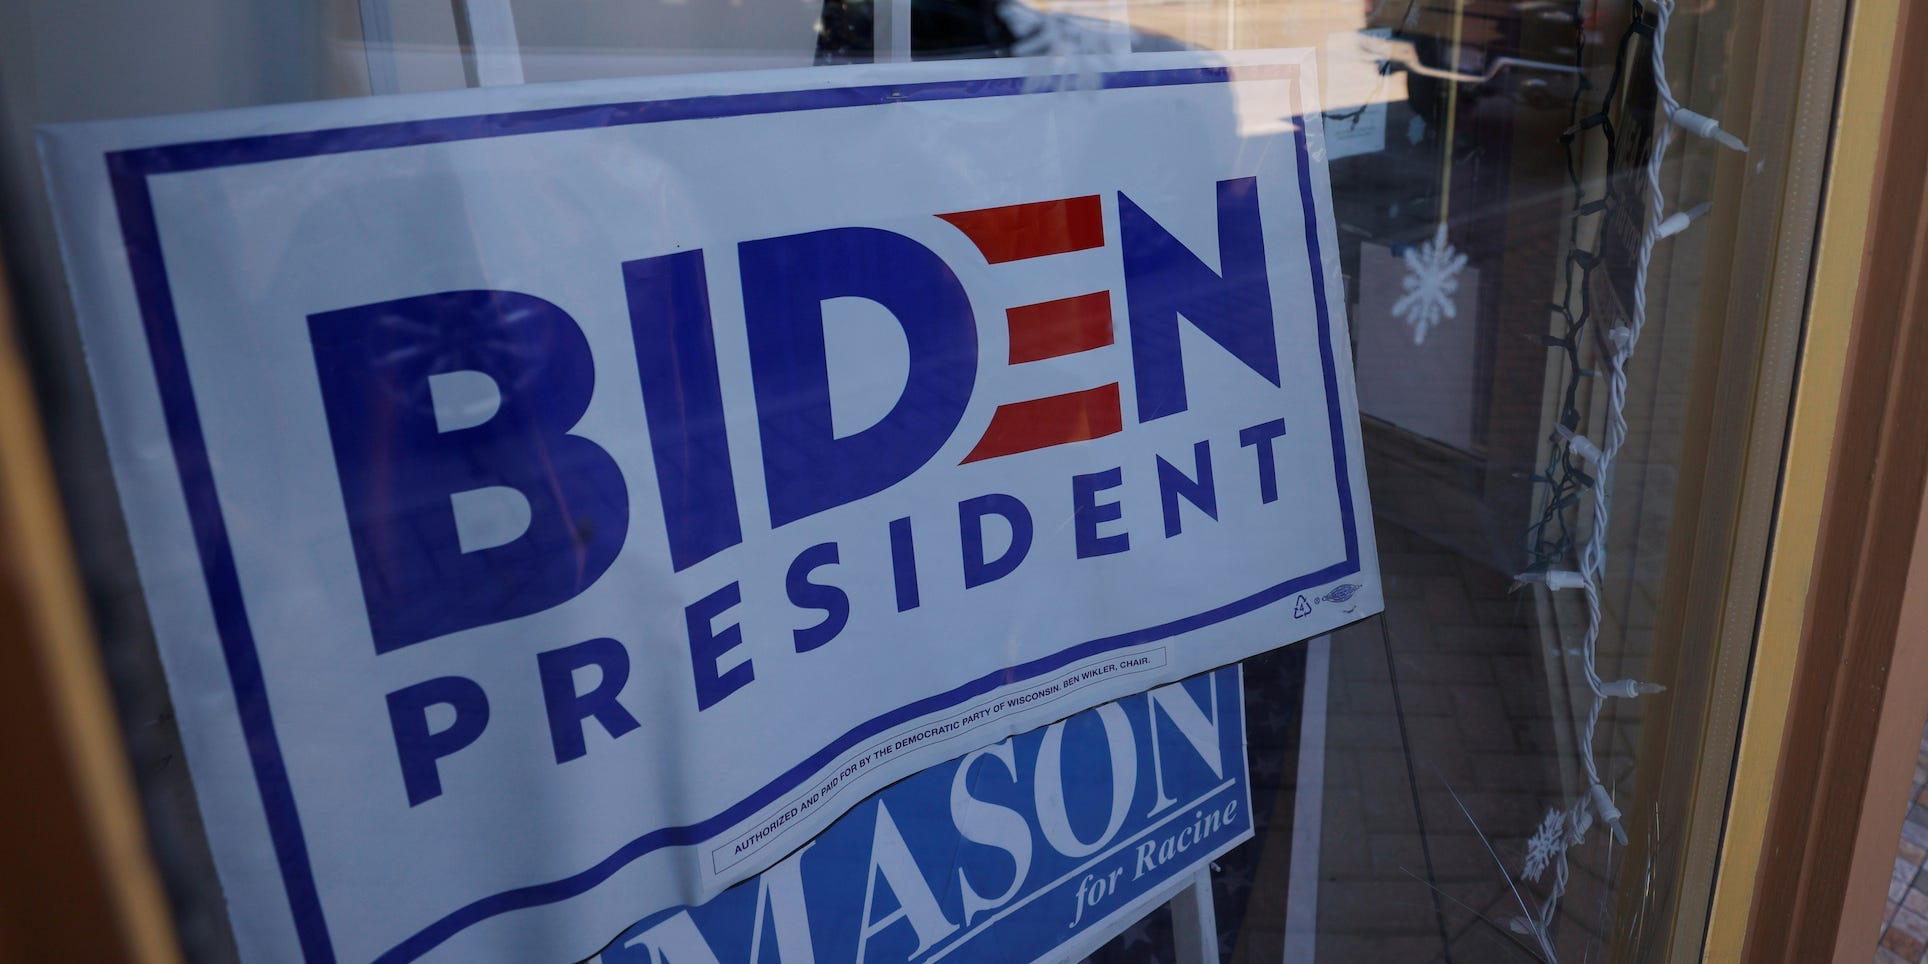 A sign supporting Democratic presidential nominee Joe Biden hangs in the window of the Racine County Democratic Party office, during the largely virtual Democratic National Convention (DNC), in Racine, Wisconsin, U.S., August 19, 2020.